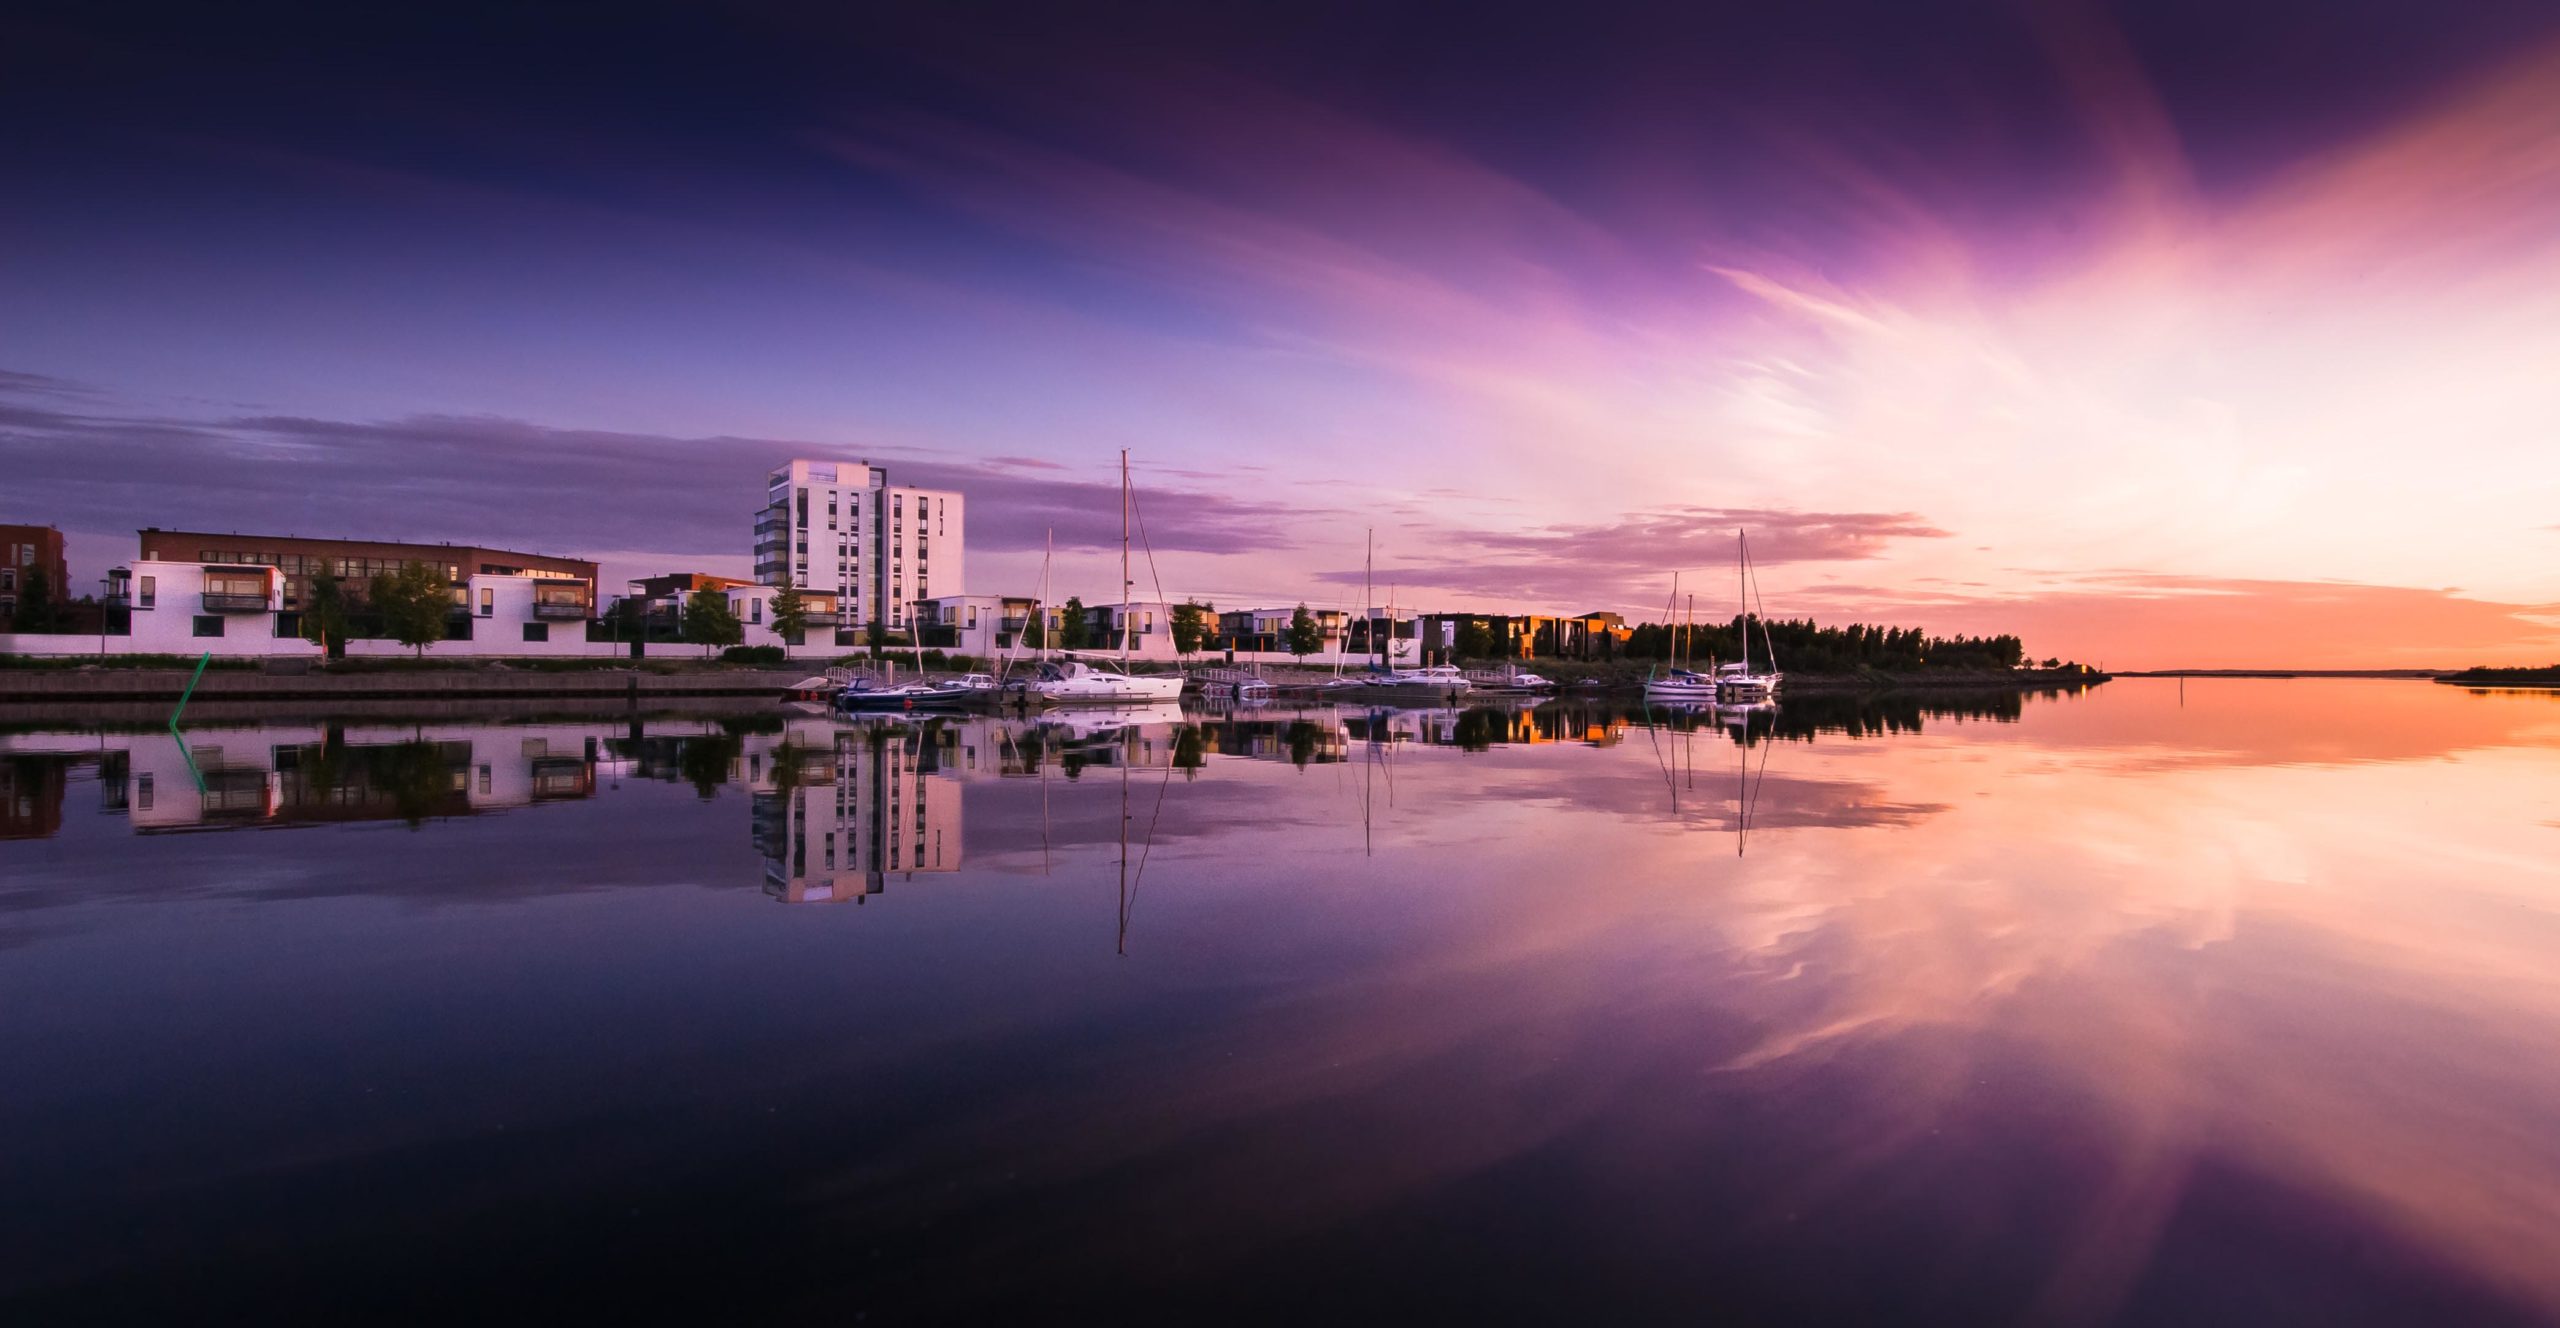 An evening dusk photographed by the water, colouring the sky with different shades of pink and yellow. On the opposite shore, there are tall apartment buildings and sailboats.